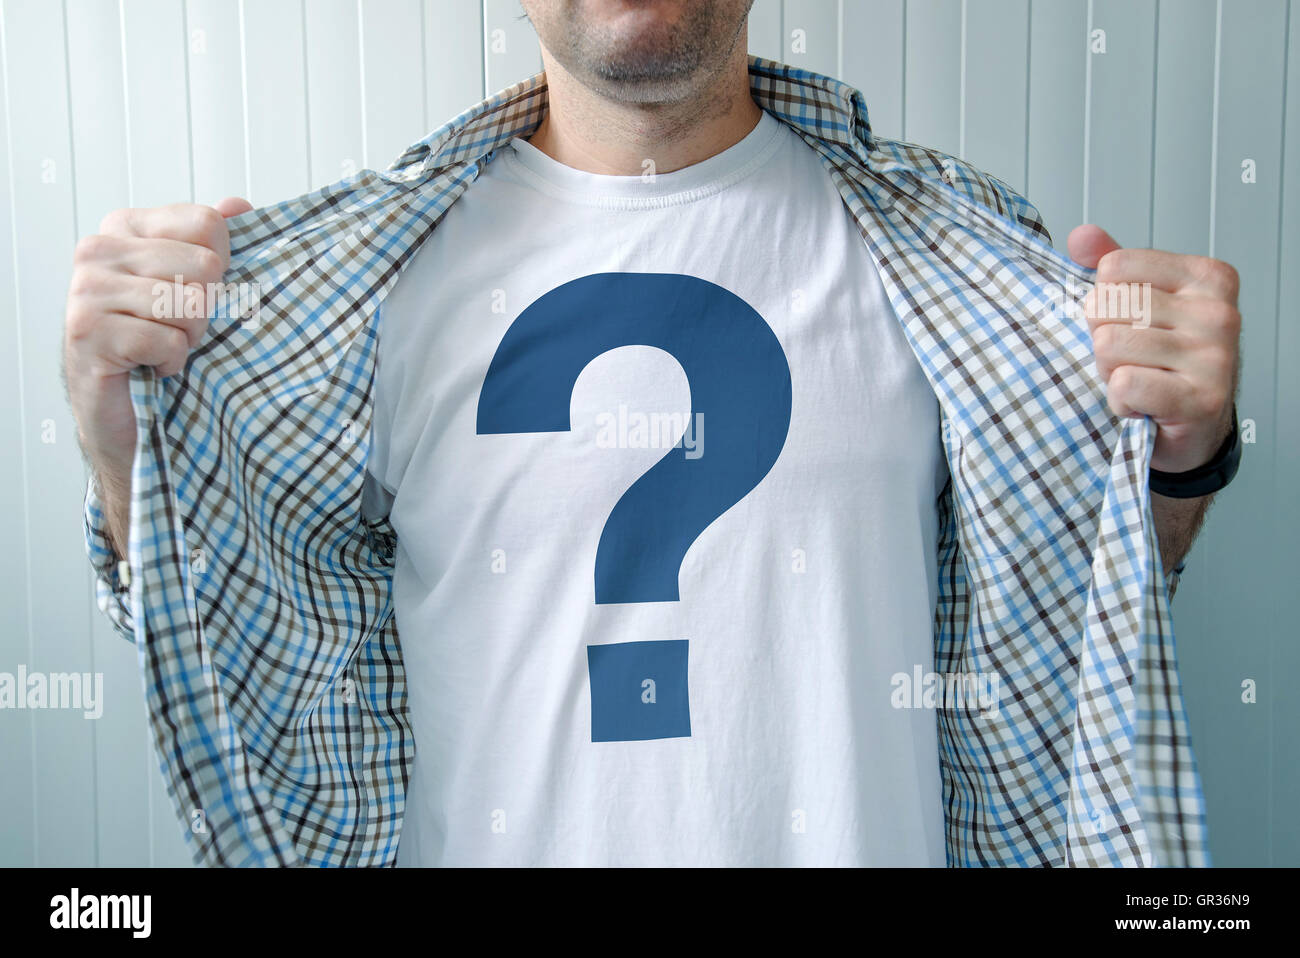 Guy wearing white t-shirt with question mark symbol print Stock Photo